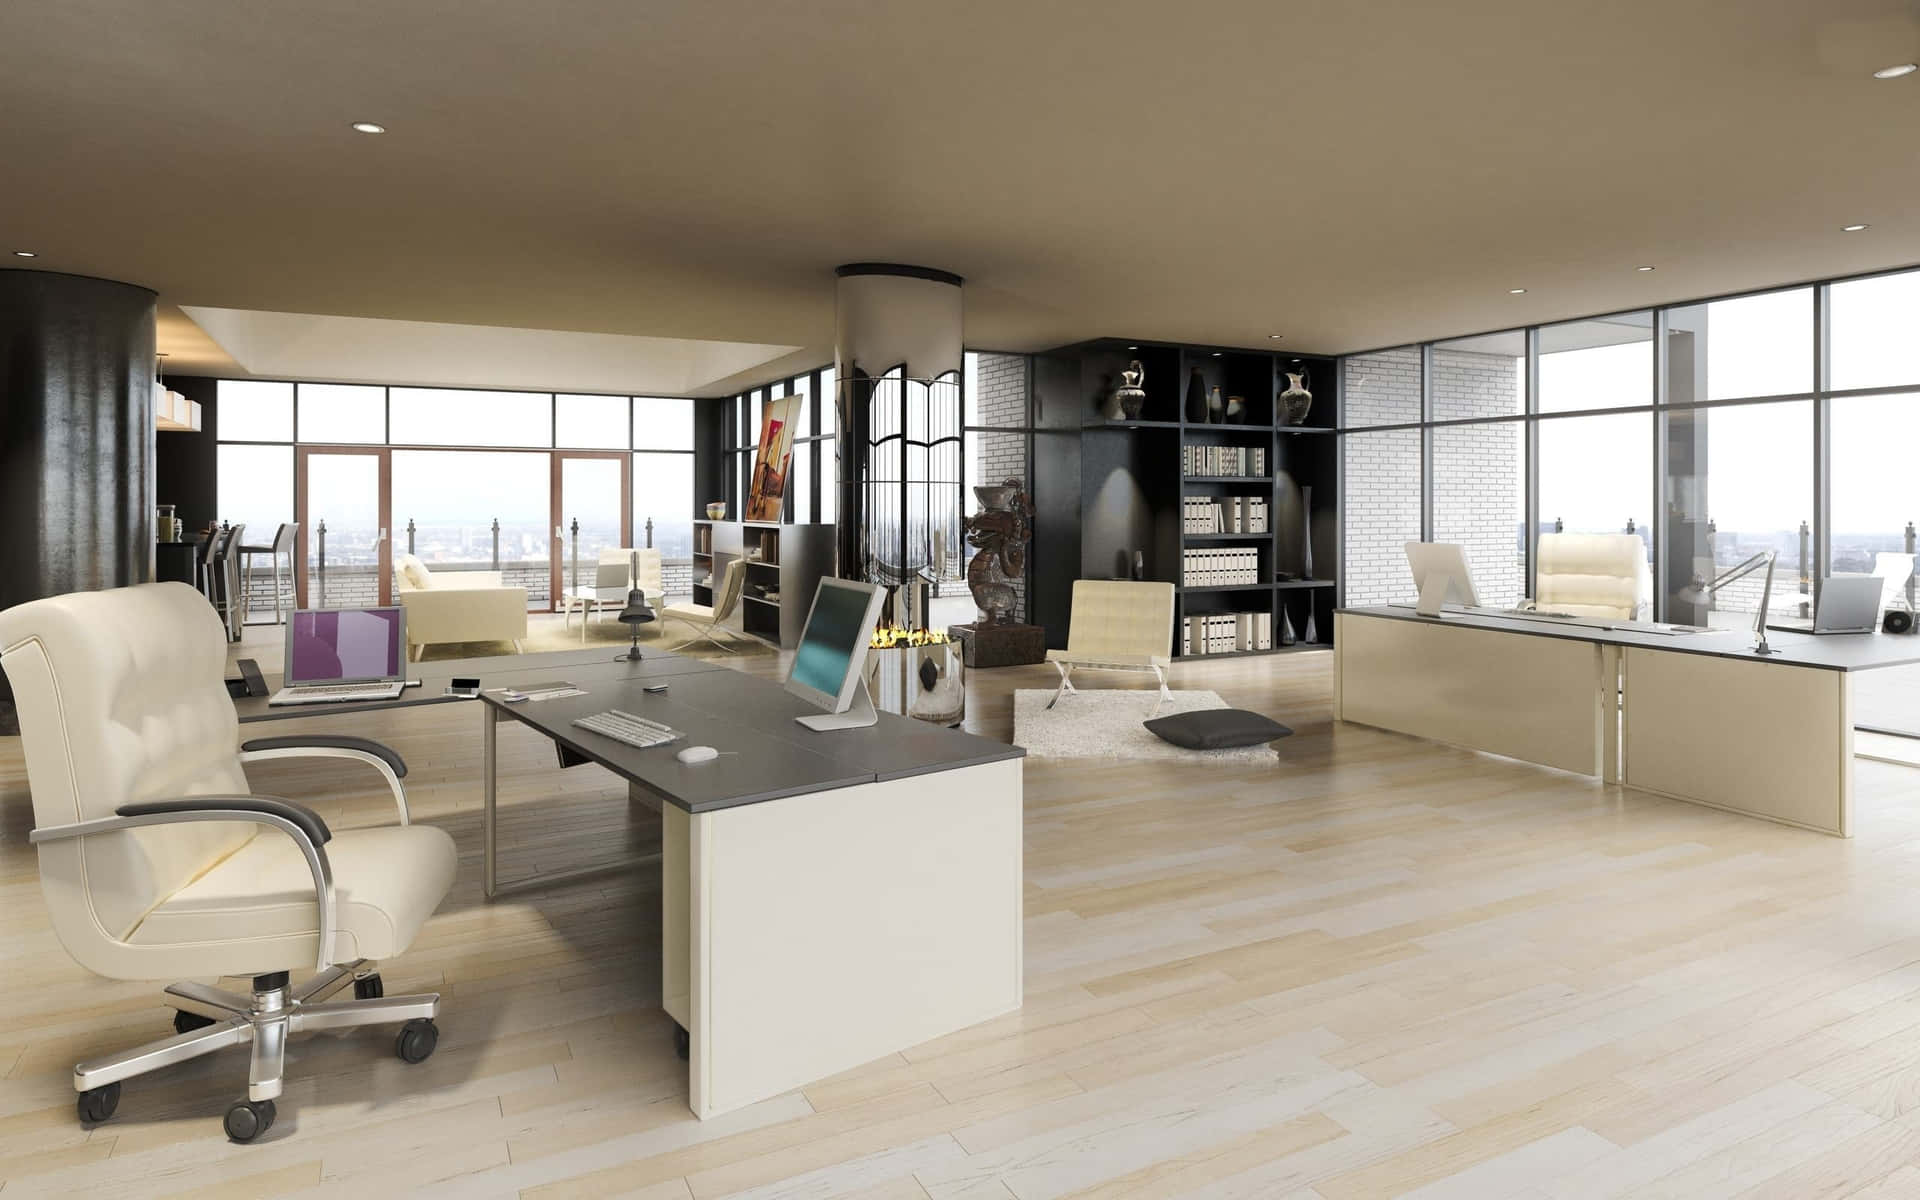 Penthouse Office 1440p Office Background